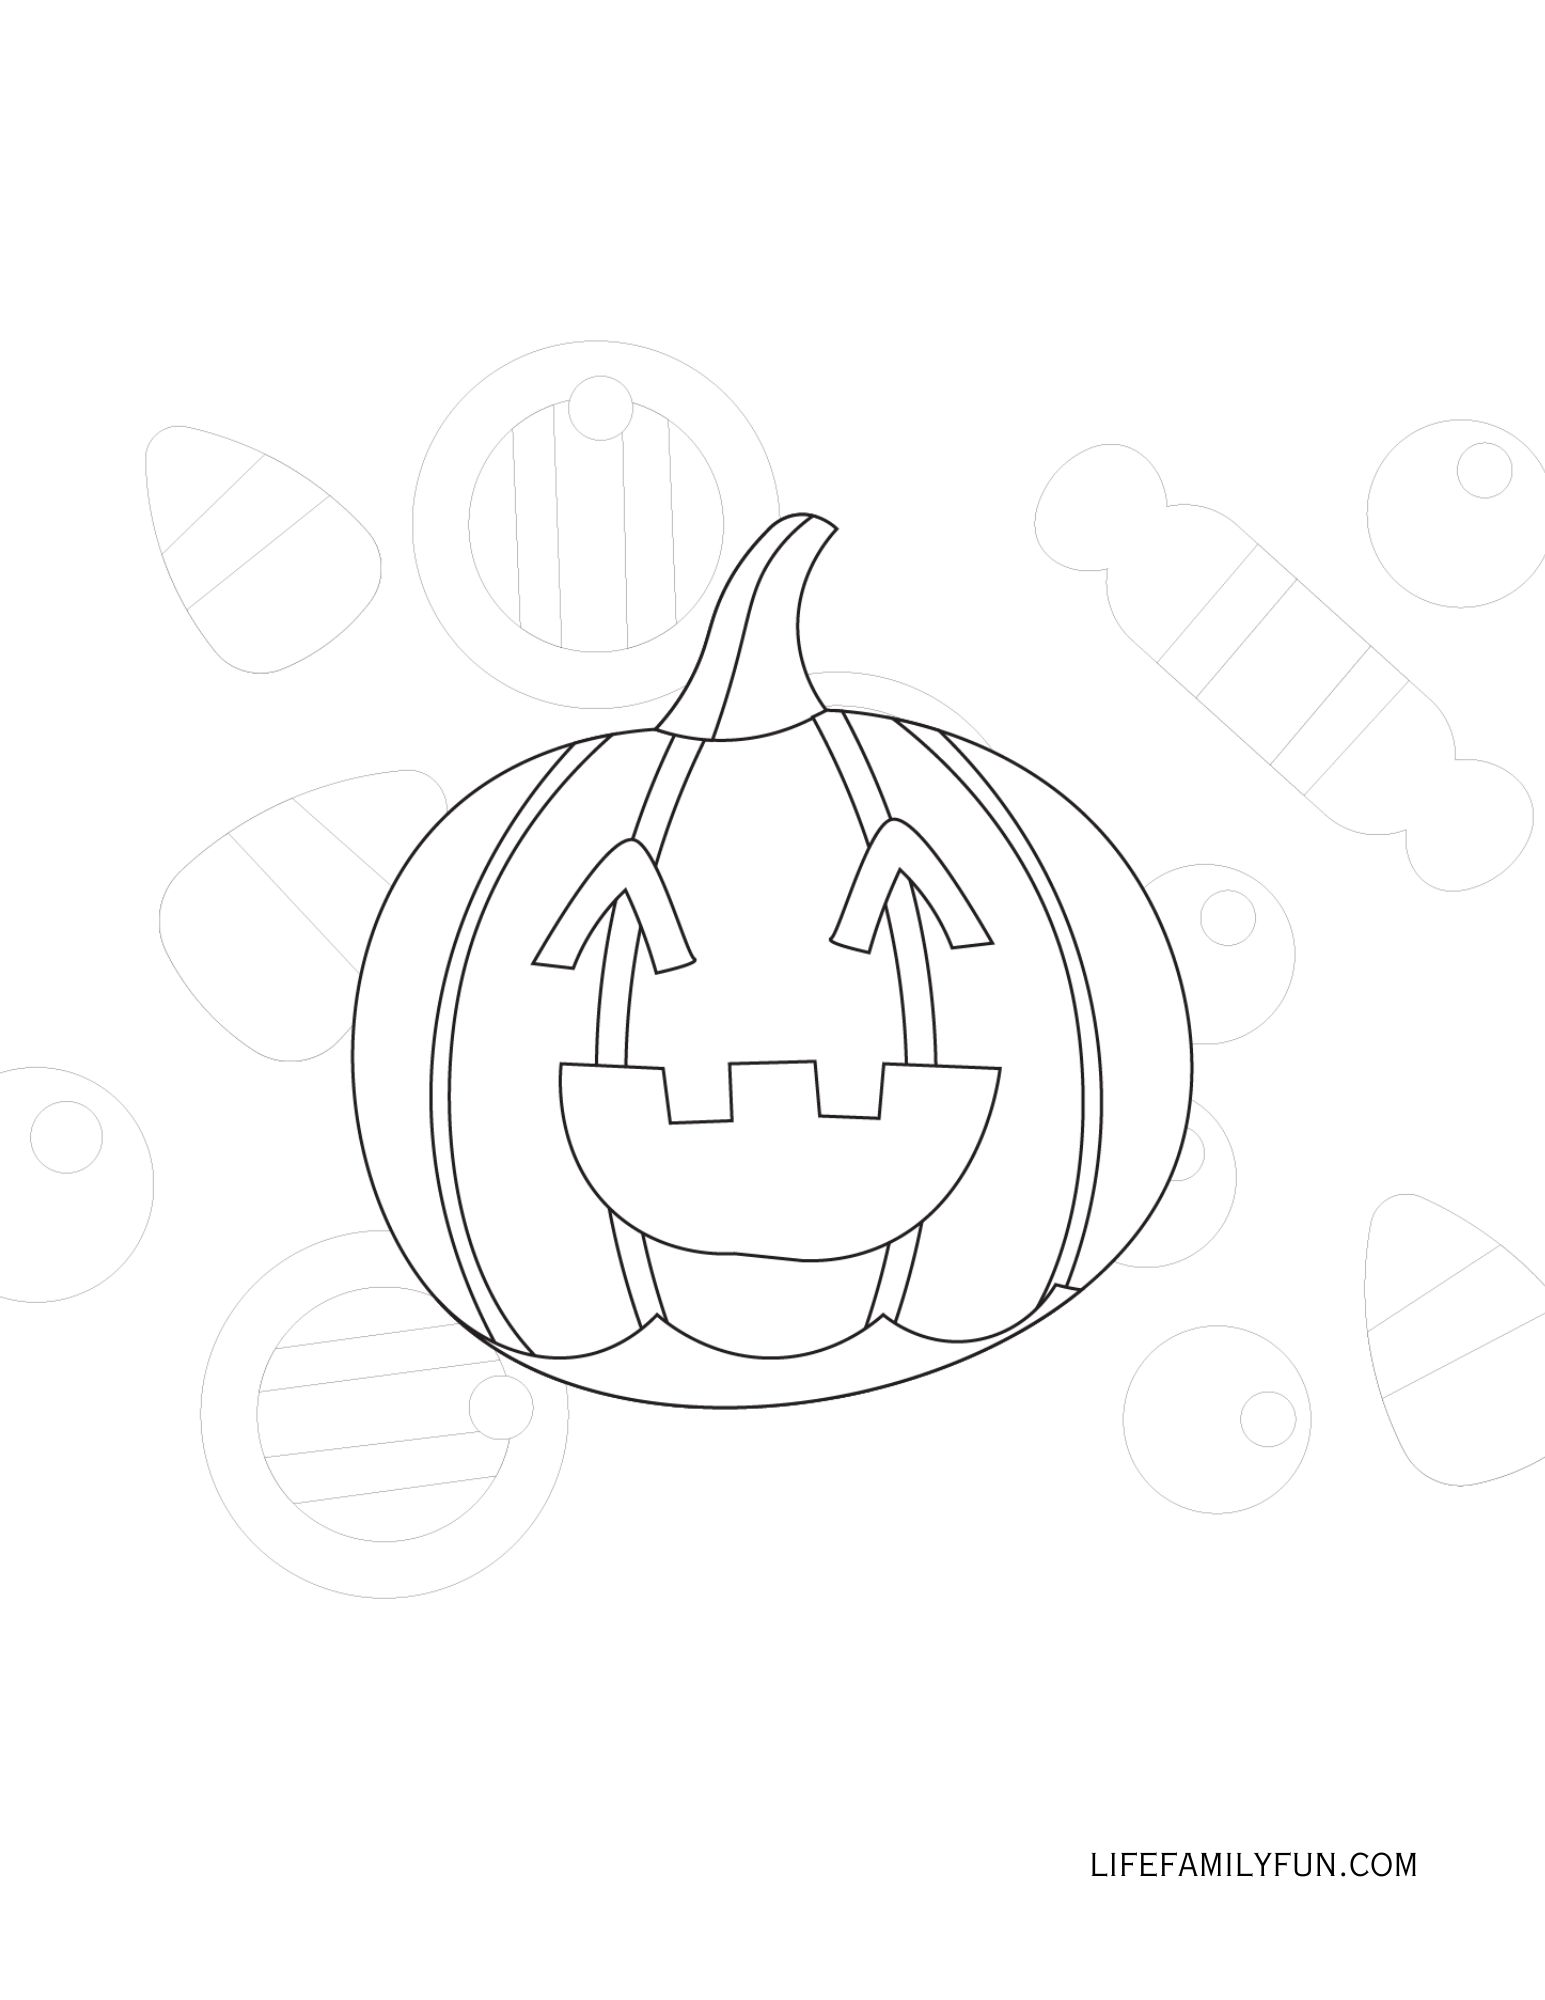 Just Another Modern Halloween Pumpkin Coloring Page